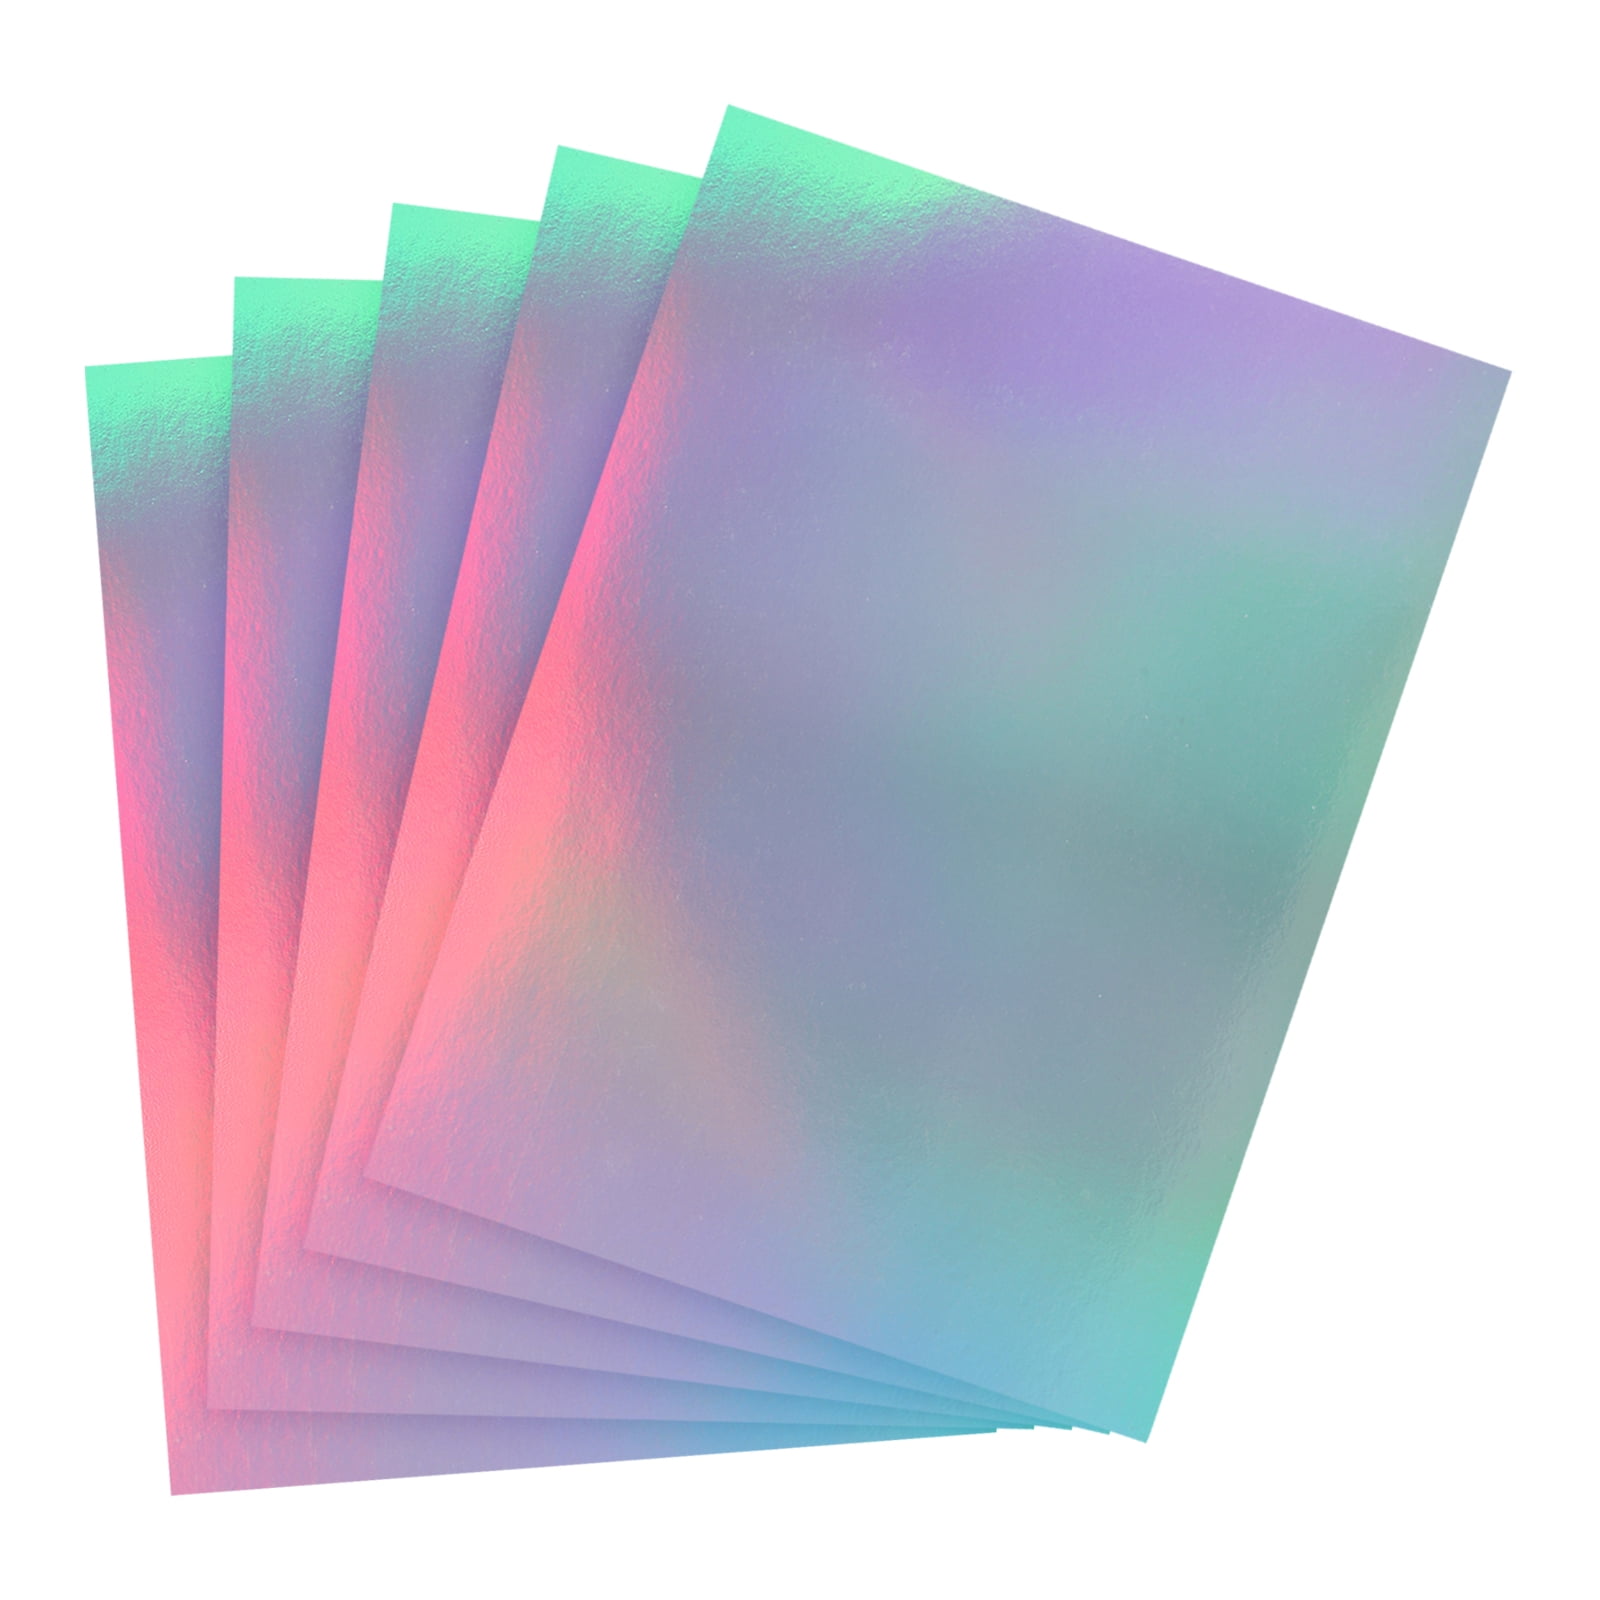 Silver Laser Plain Rainbow Holographic Cardstock Paper, Metallic Reflective  Laser Mirror-silver Cardstock 100 Sheets 8.5 x 11 inches 100lb Cover, for